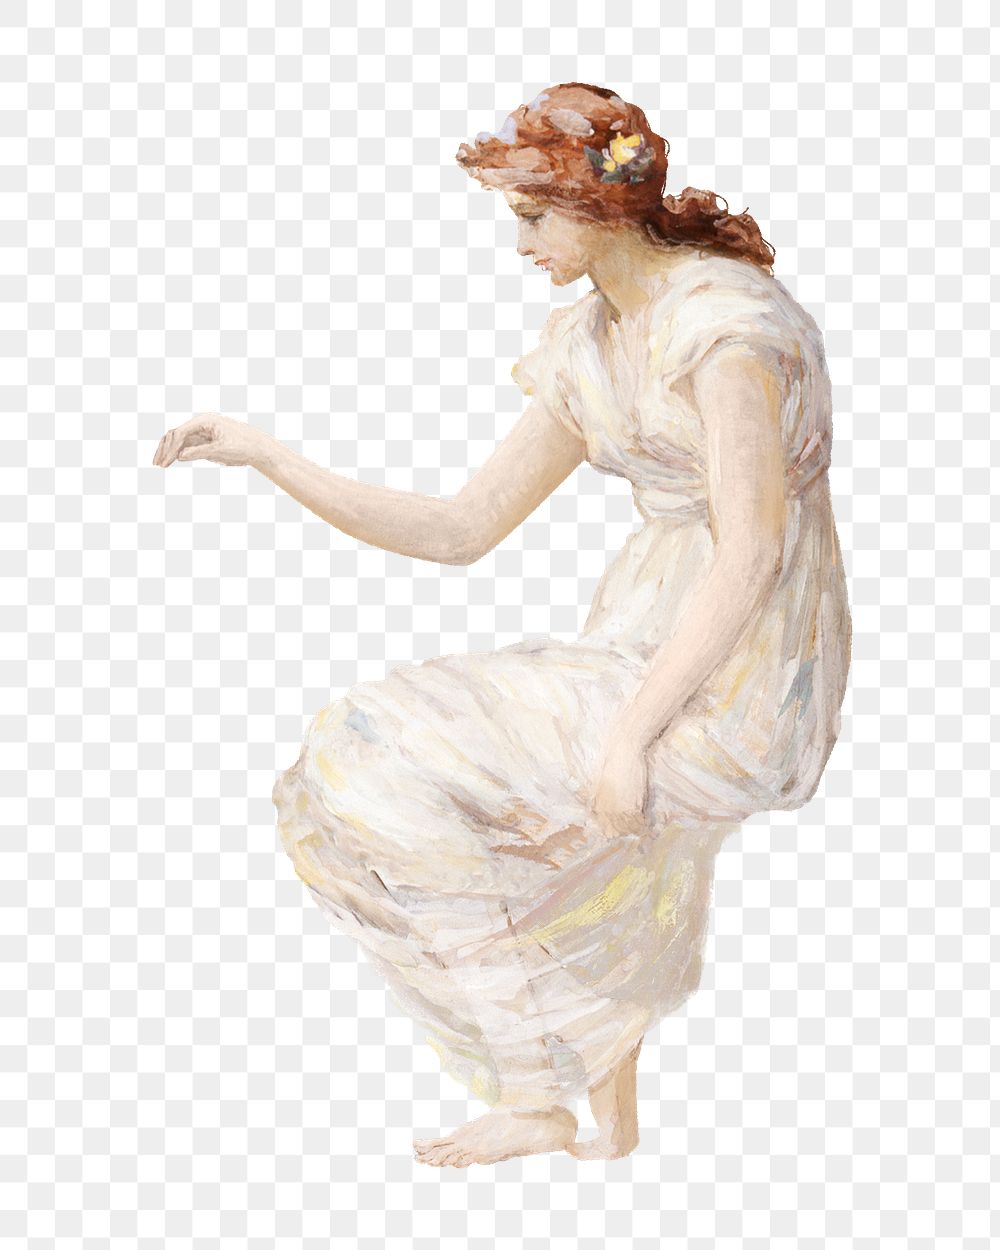 Vintage woman png in white dress illustration by Frederick Stuart Church, transparent background. Remixed by rawpixel.